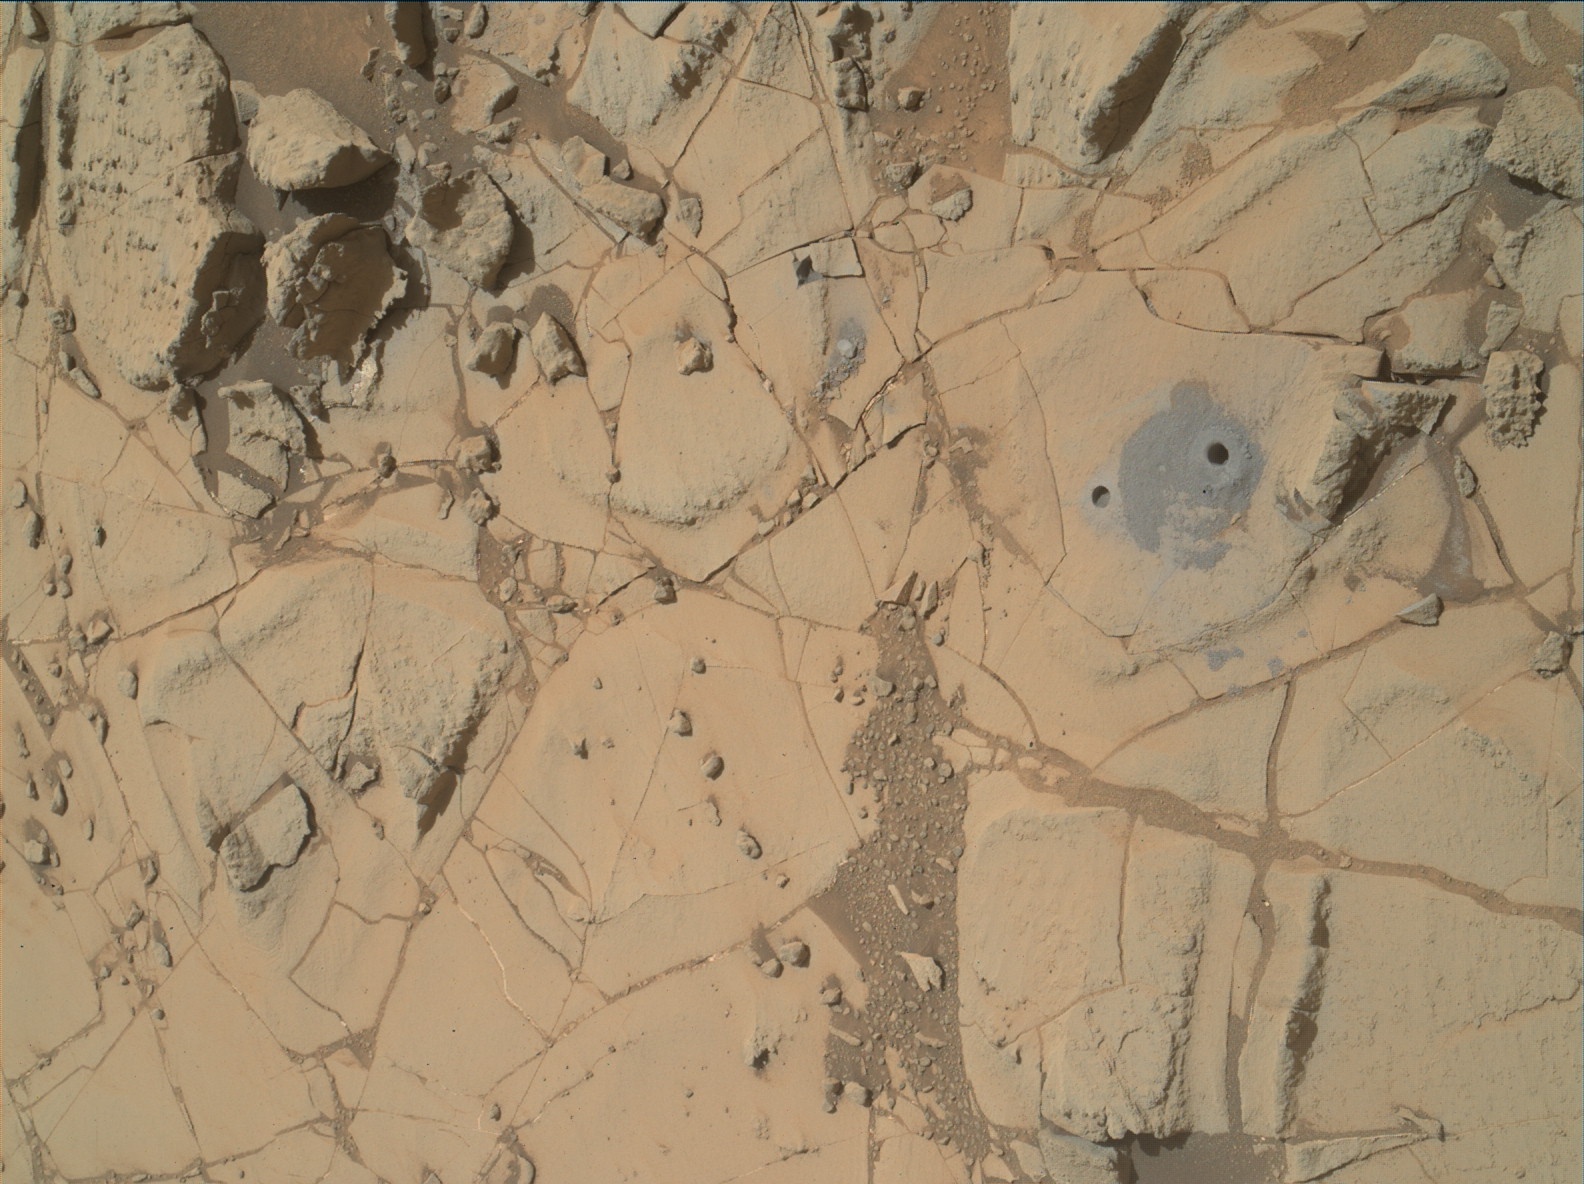 Nasa's Mars rover Curiosity acquired this image using its Mars Hand Lens Imager (MAHLI) on Sol 884